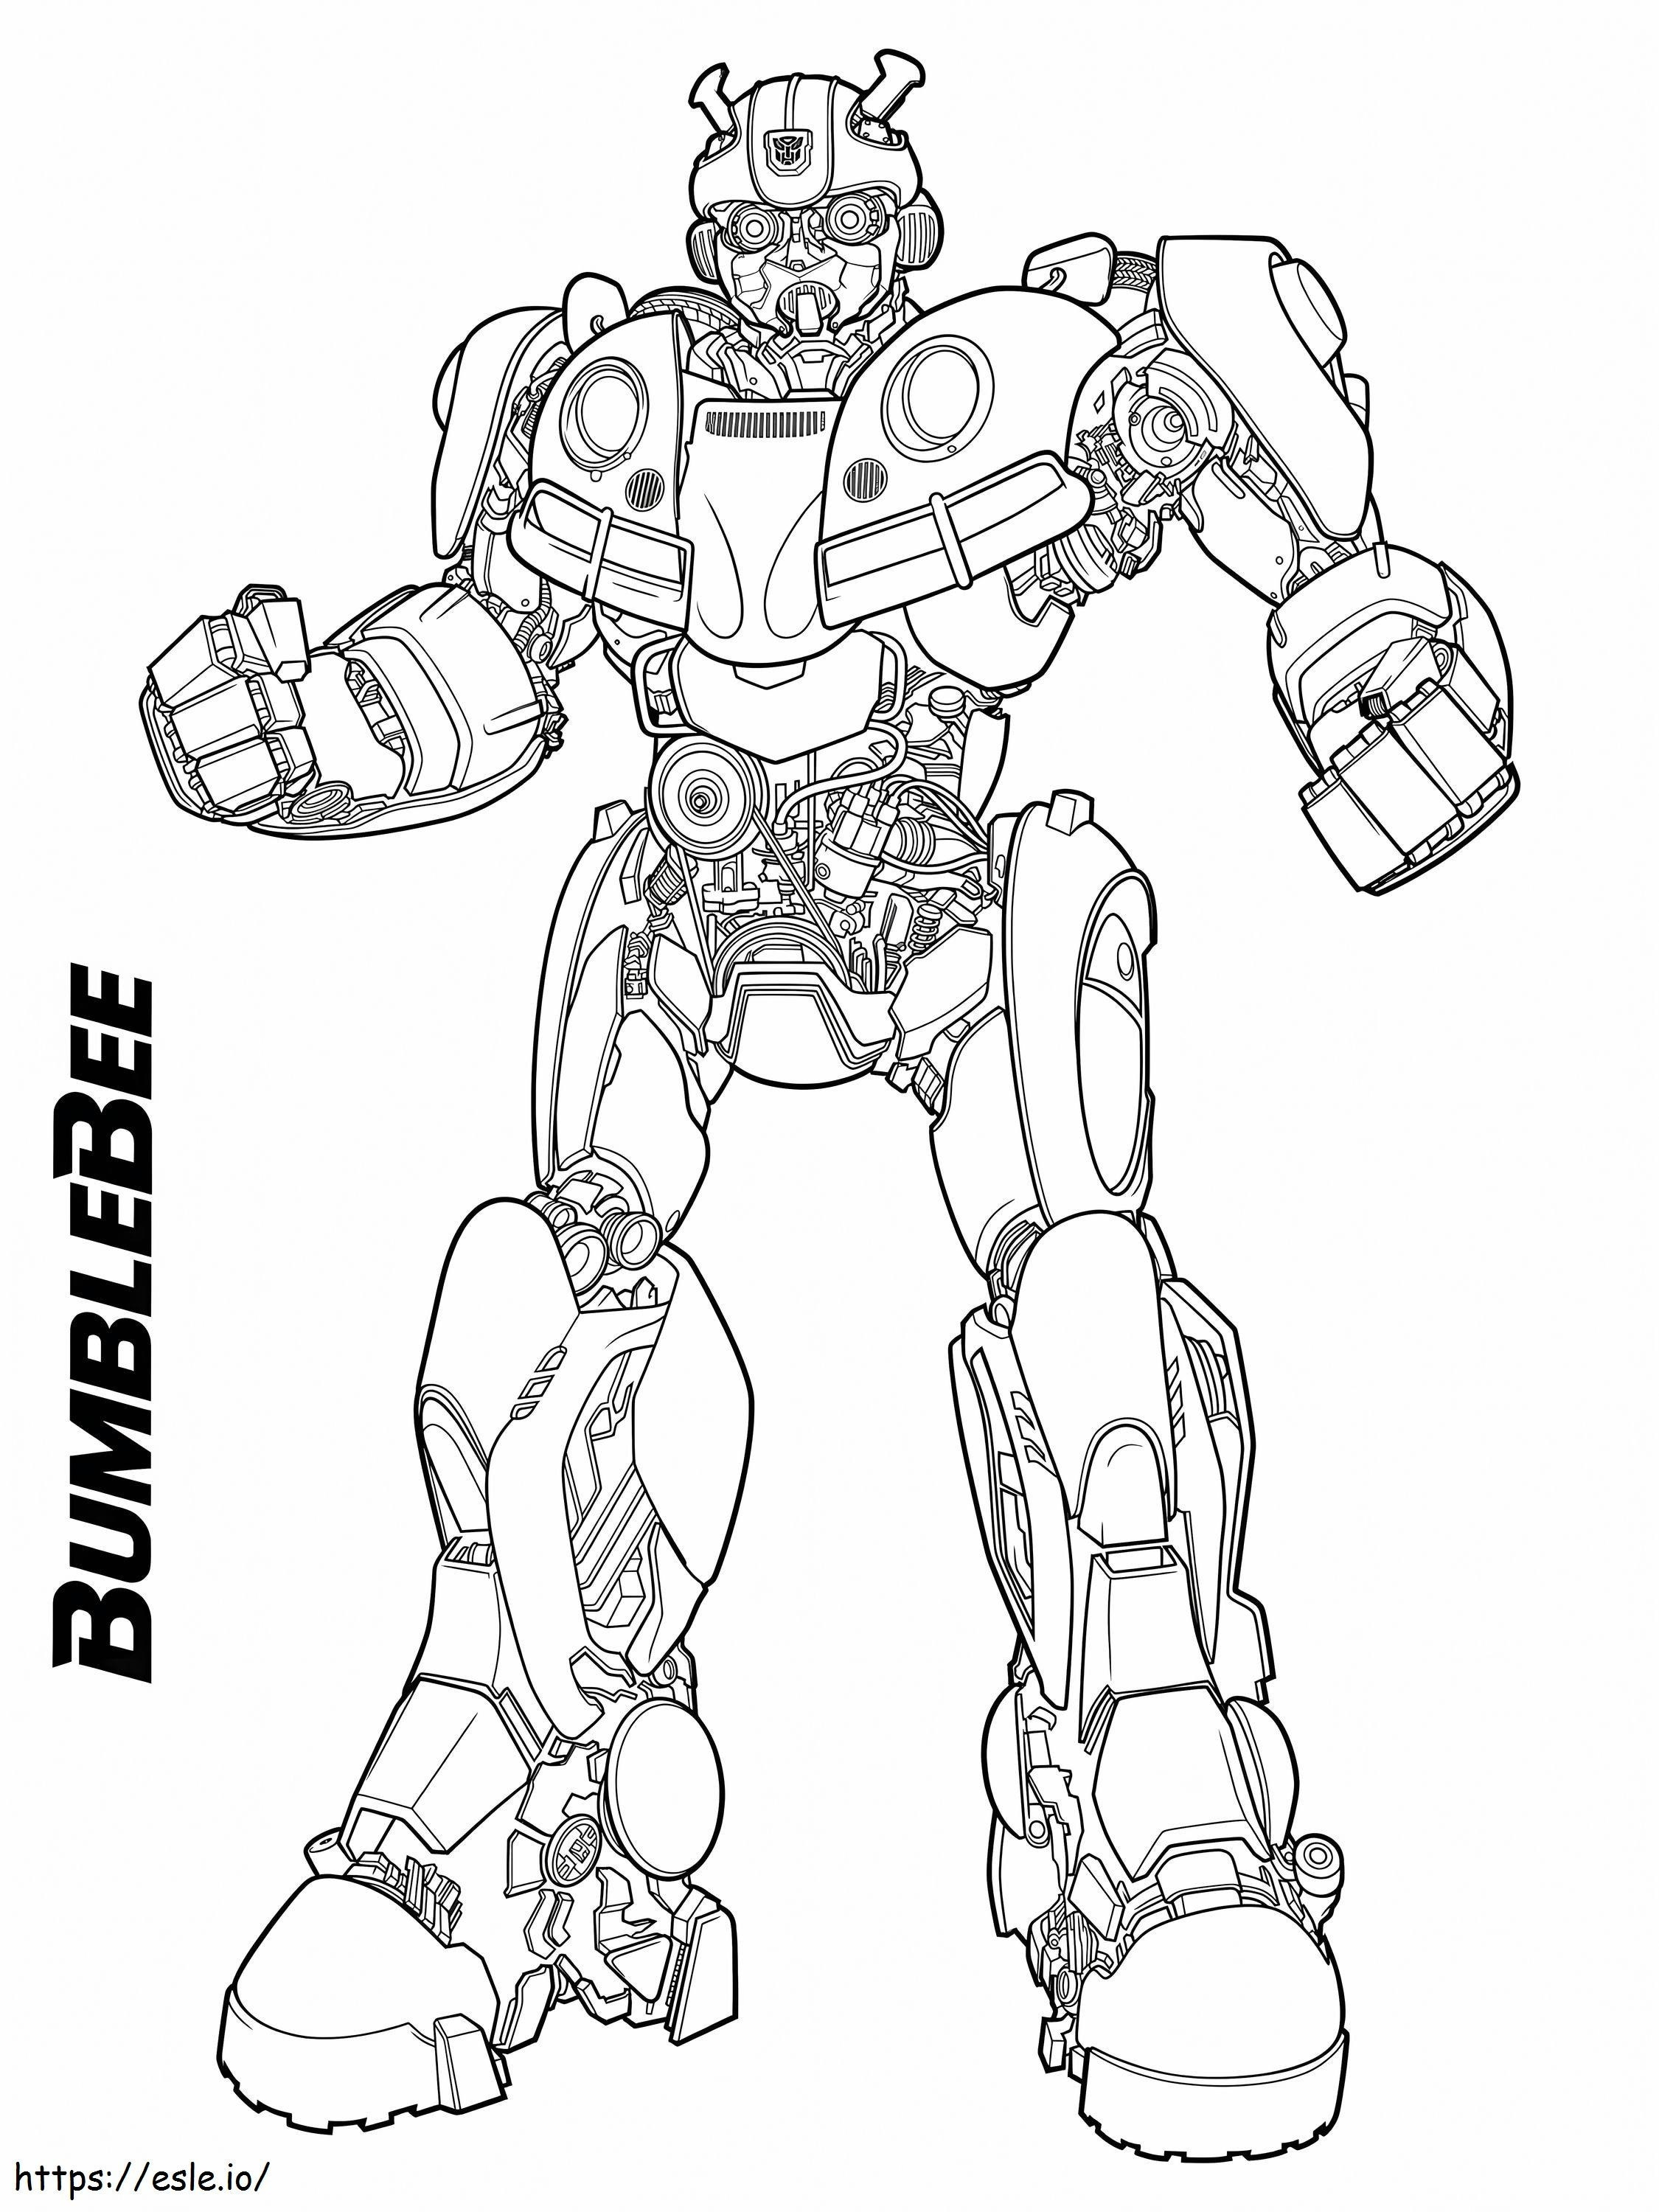 Autobot Bumblebee coloring page